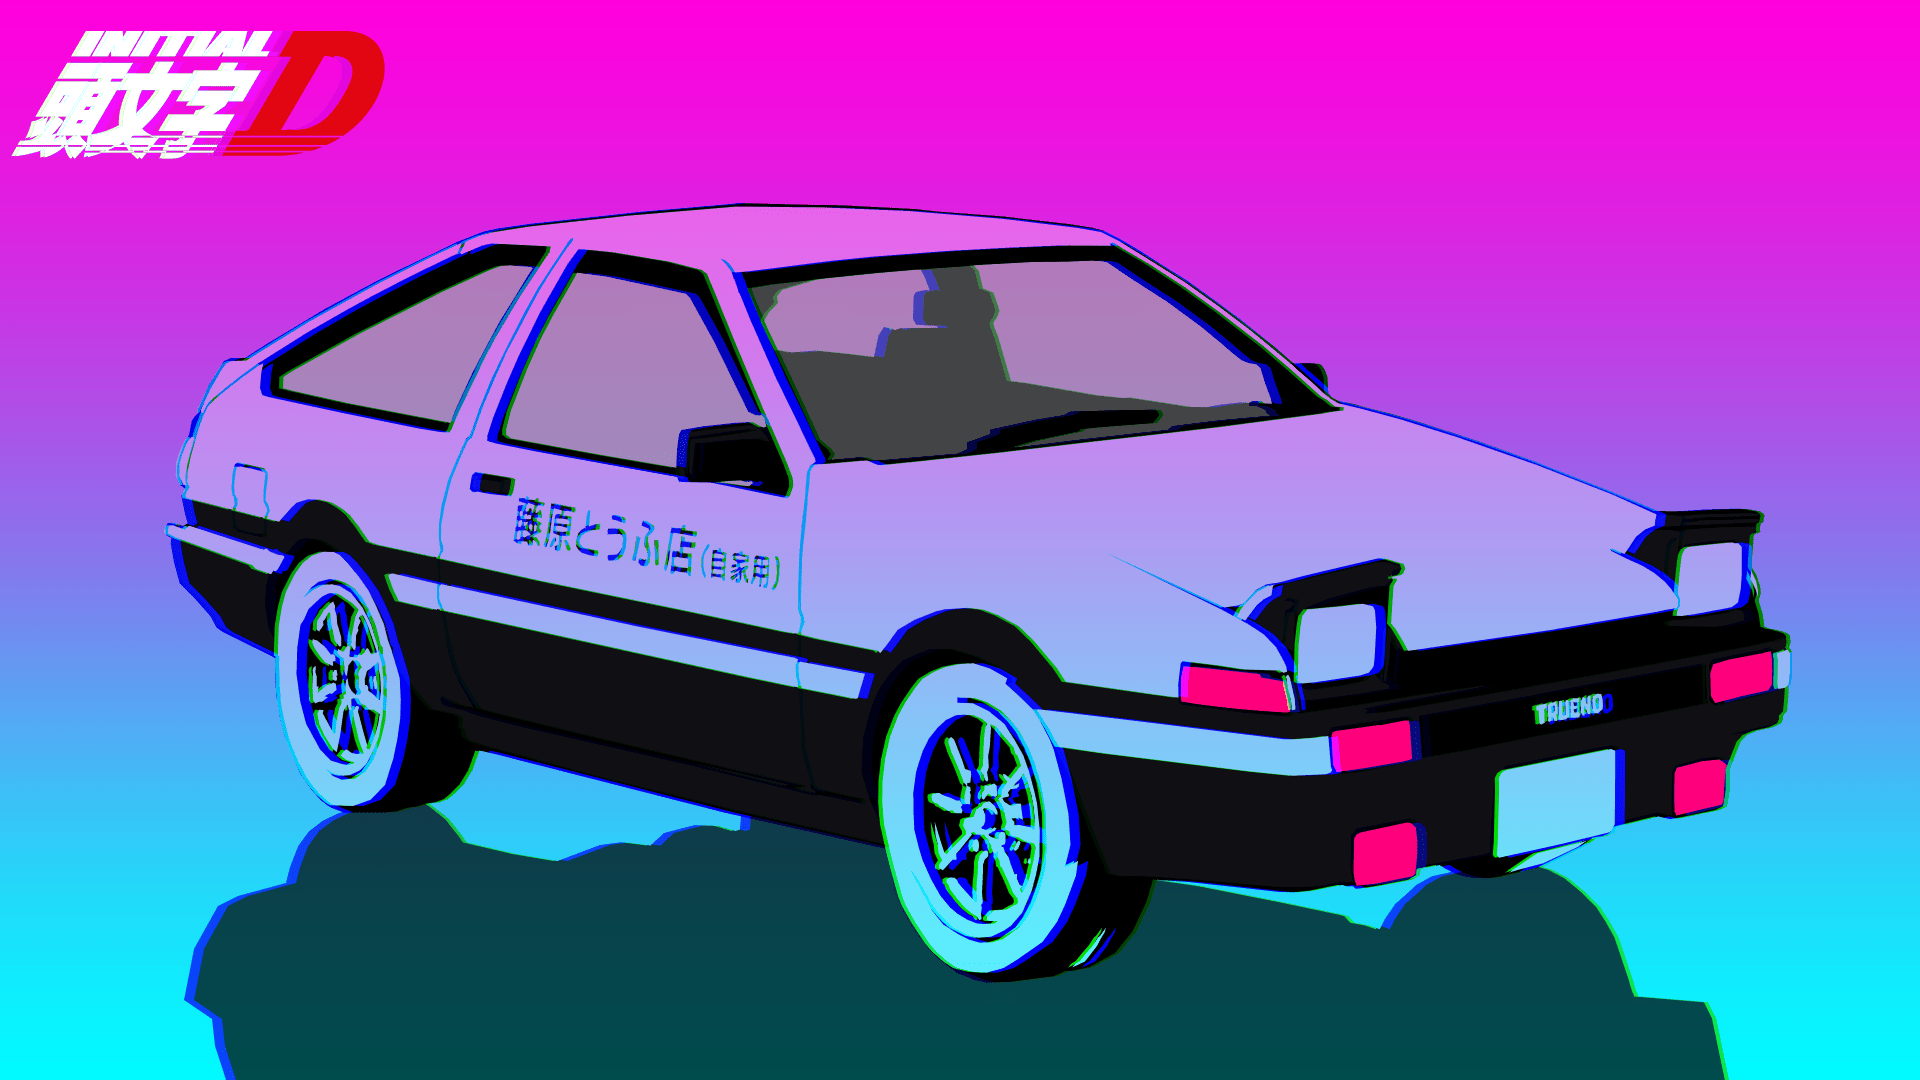 Here's a wallpaper I made for the 86